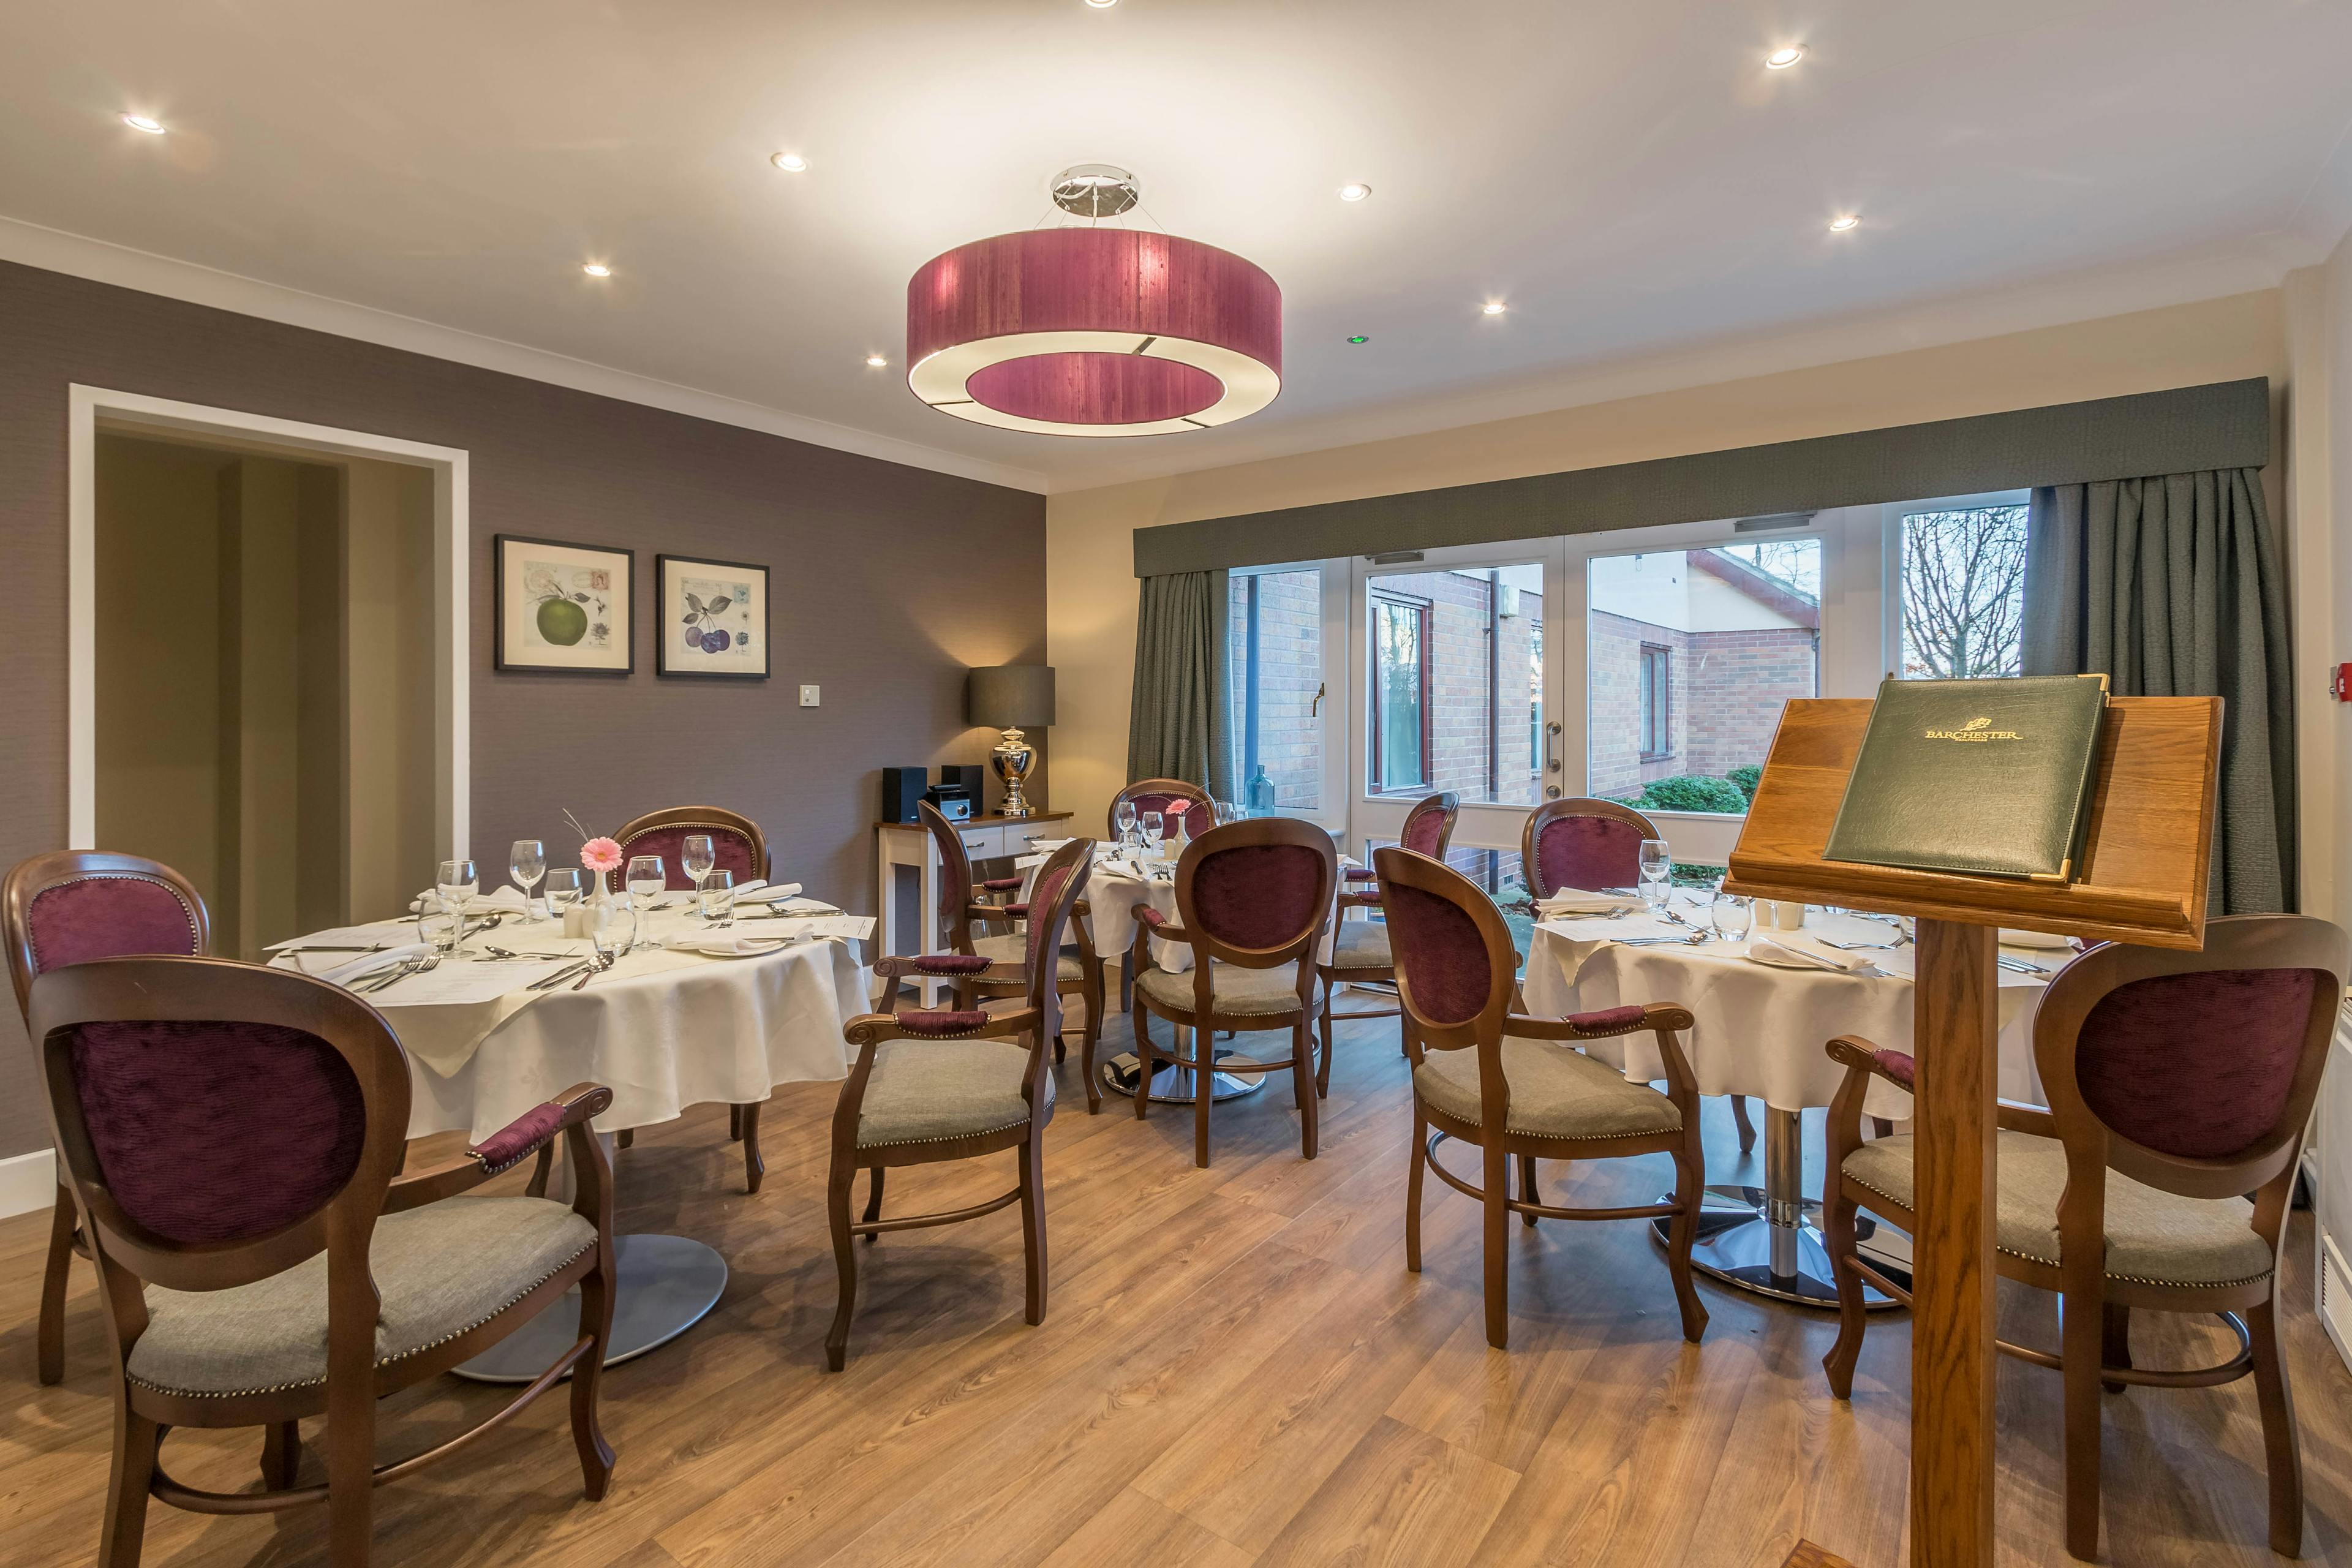 Dining Room at Overslade House Care Home in Rugby, Warwickshire